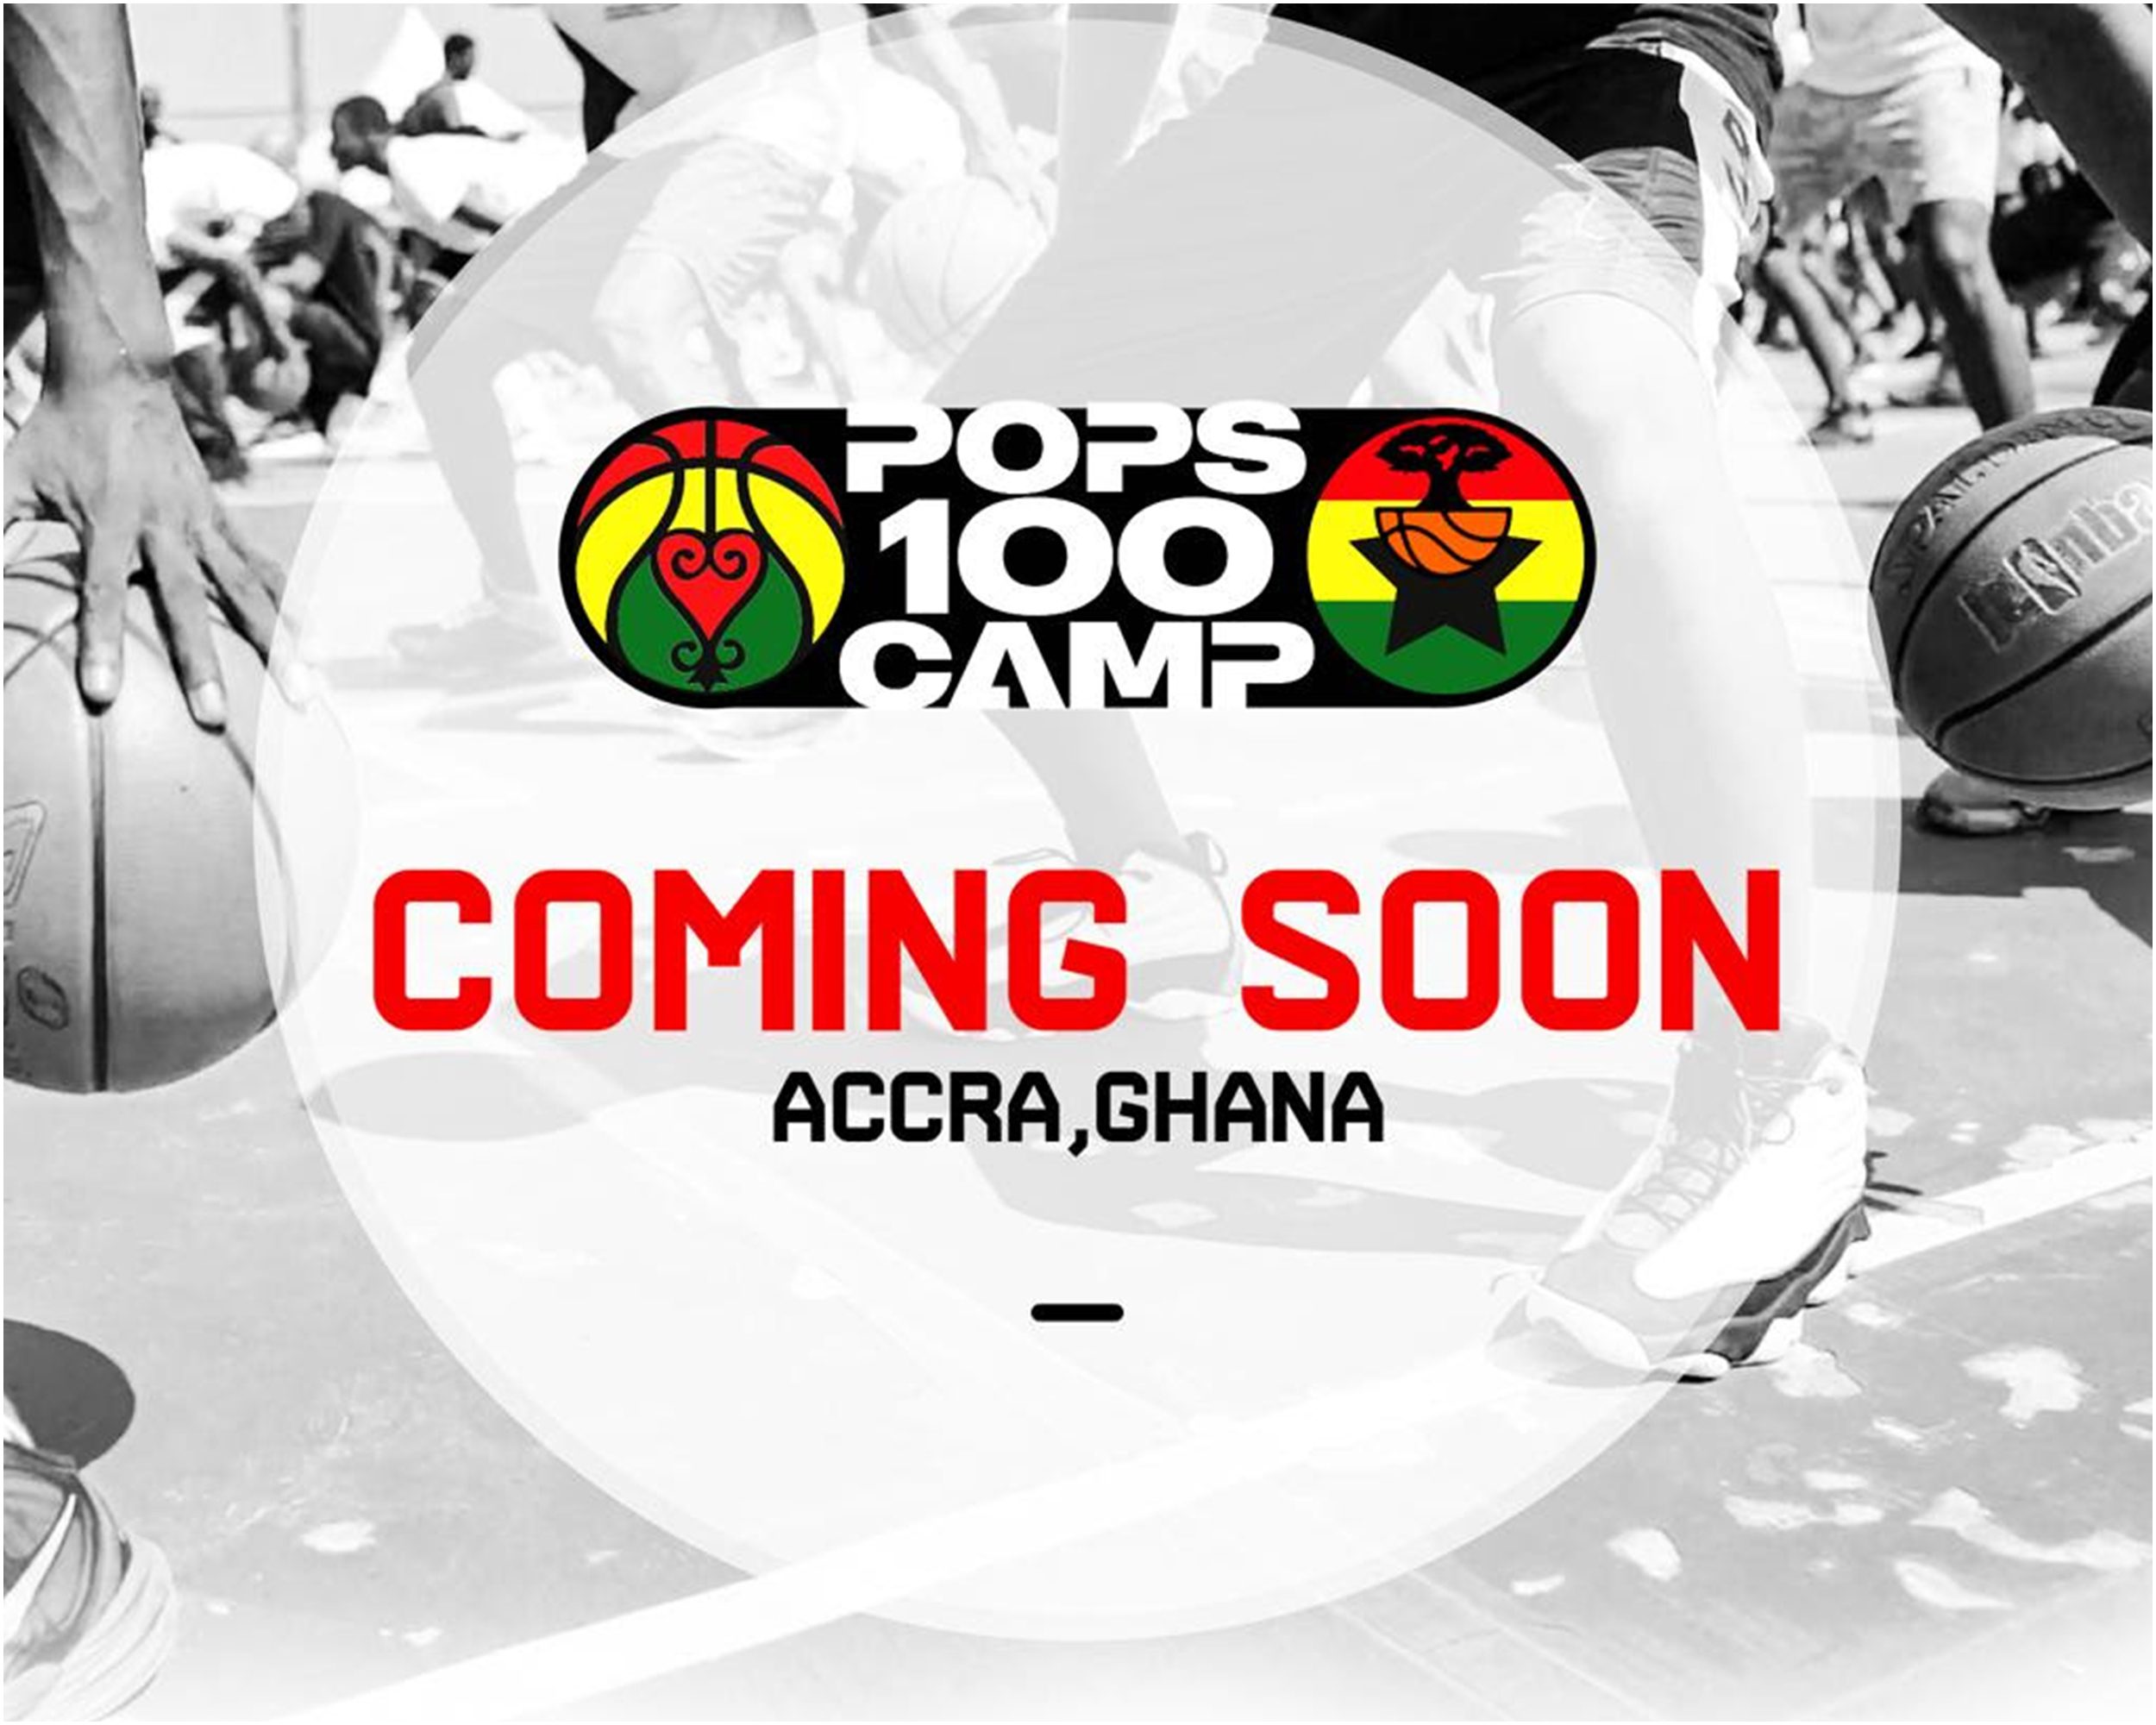 Basketball Africa League Supports the Pops 100 Camp in Ghana